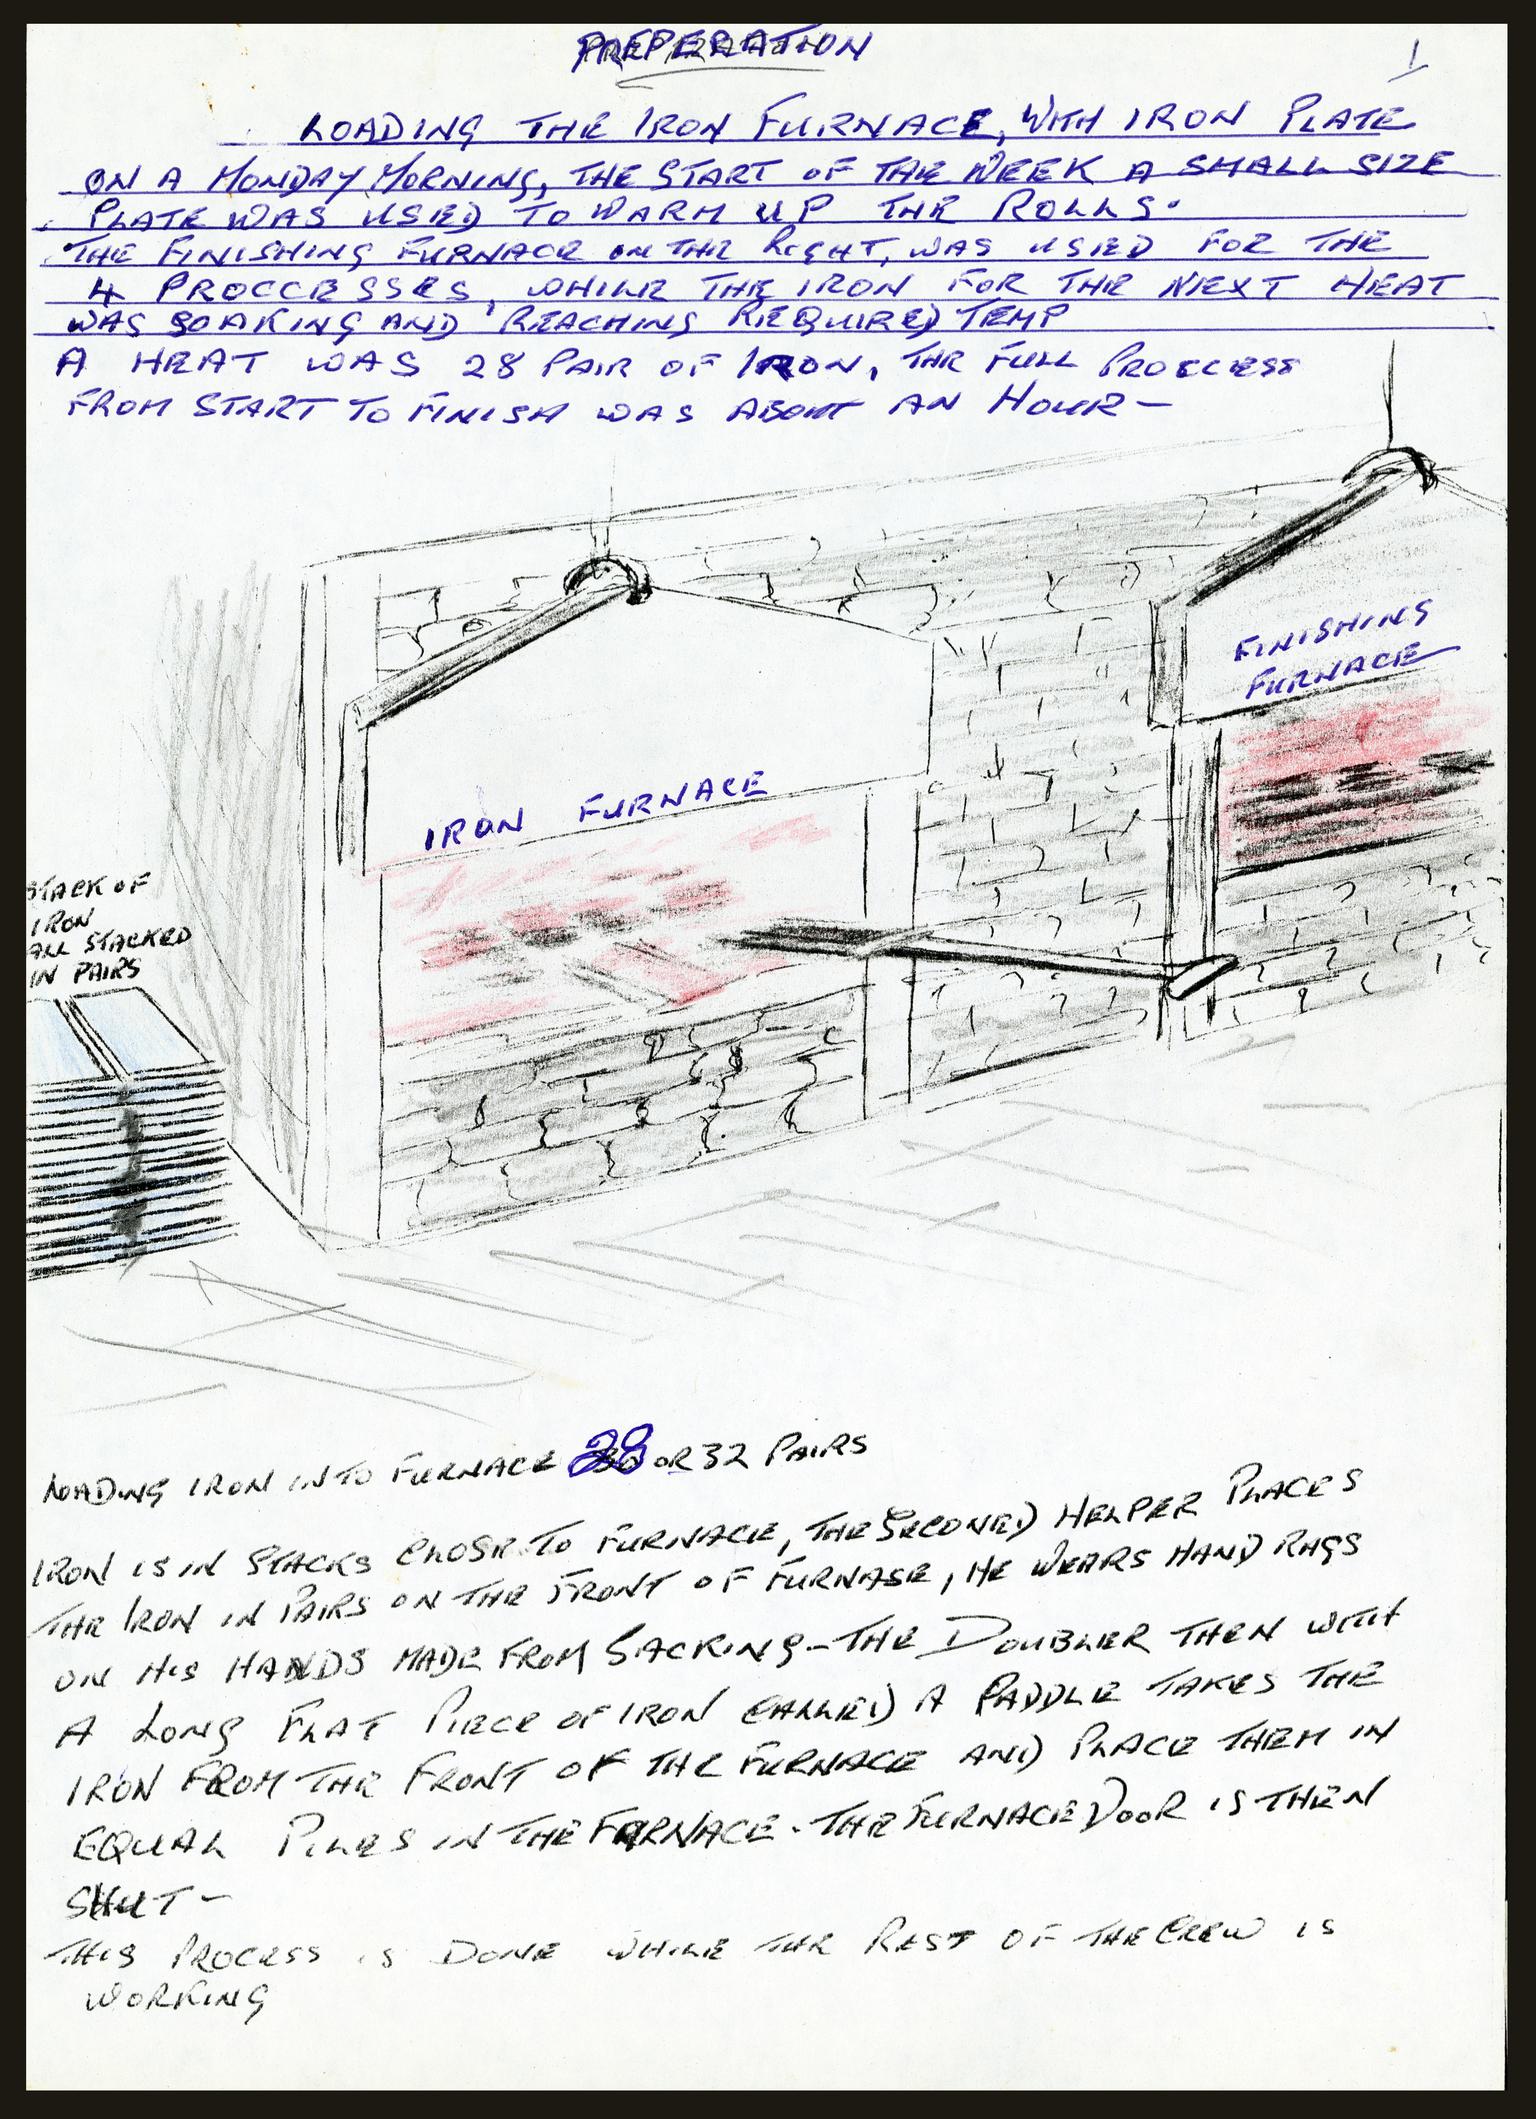 Processes in the Welsh tinplate industry, drawing